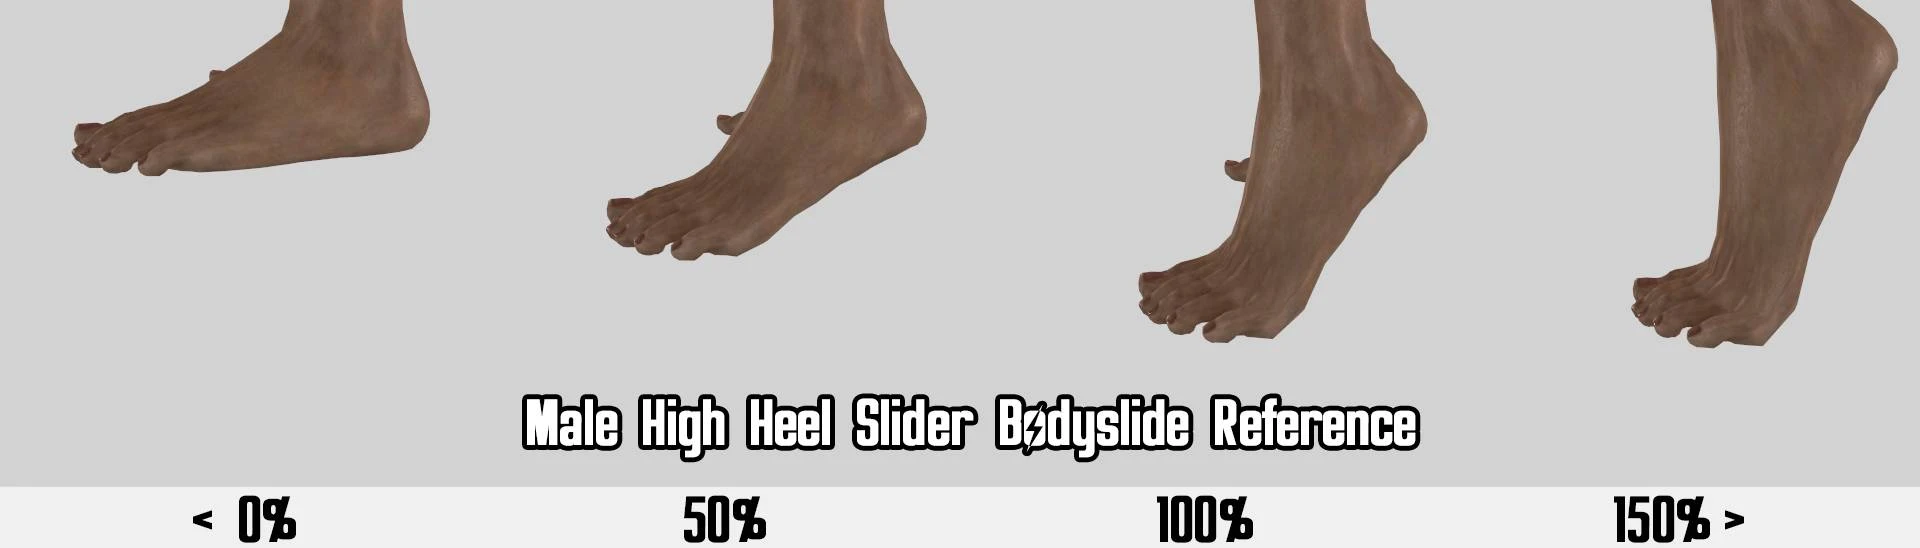 Male High Heel Slider - Bodyslide Reference at Fallout 4 Nexus